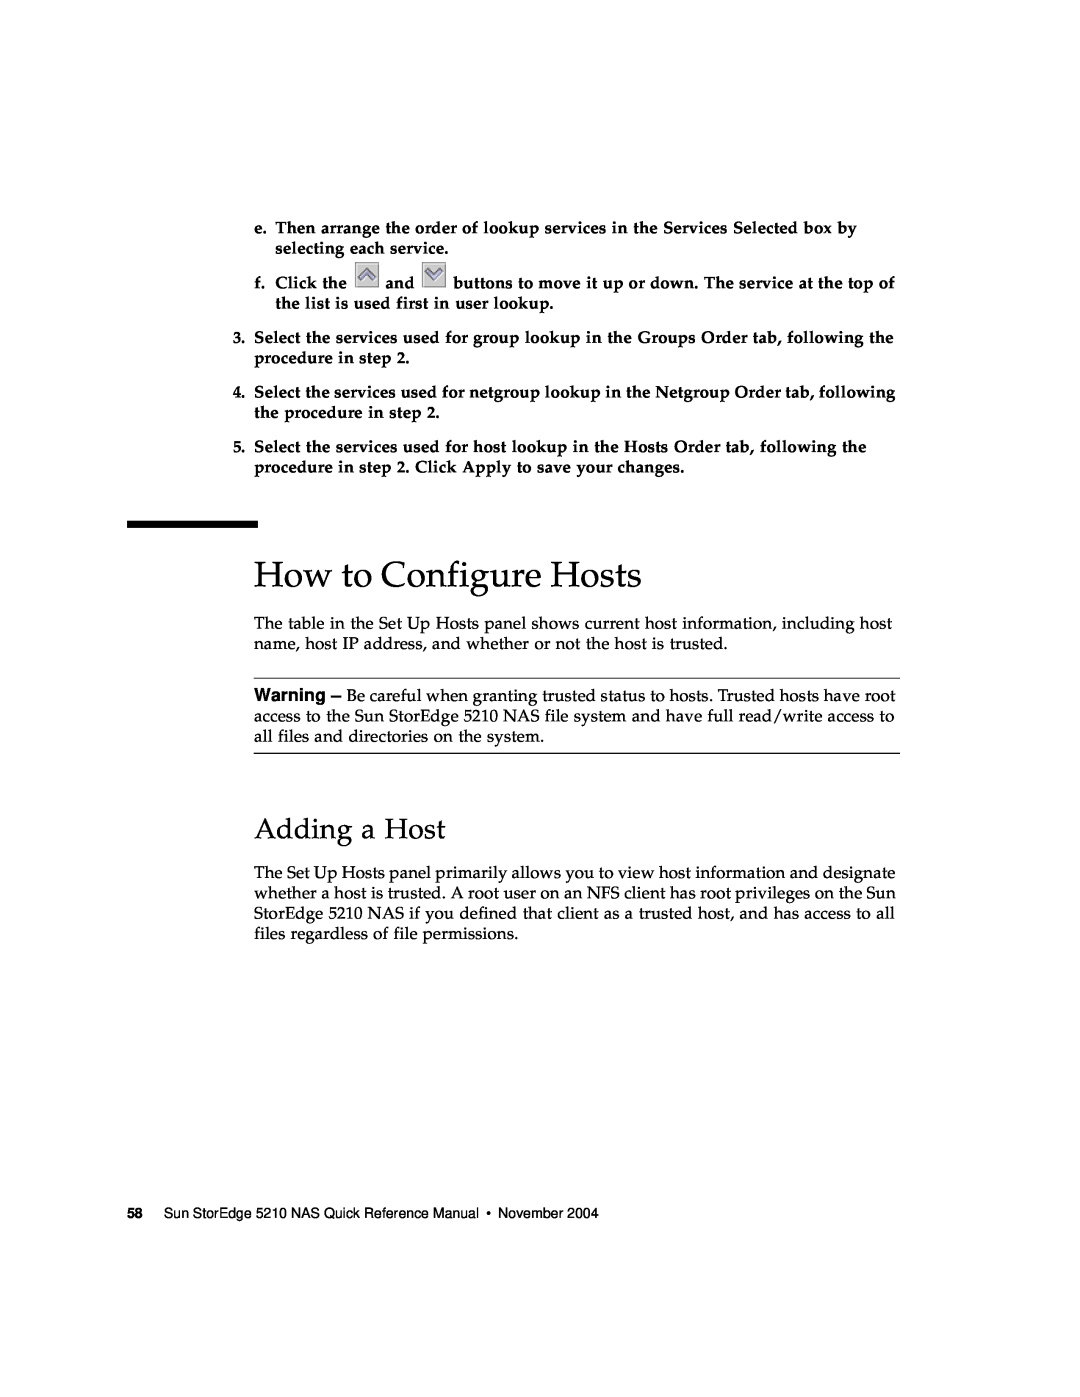 Sun Microsystems 5210 NAS manual How to Configure Hosts, Adding a Host 